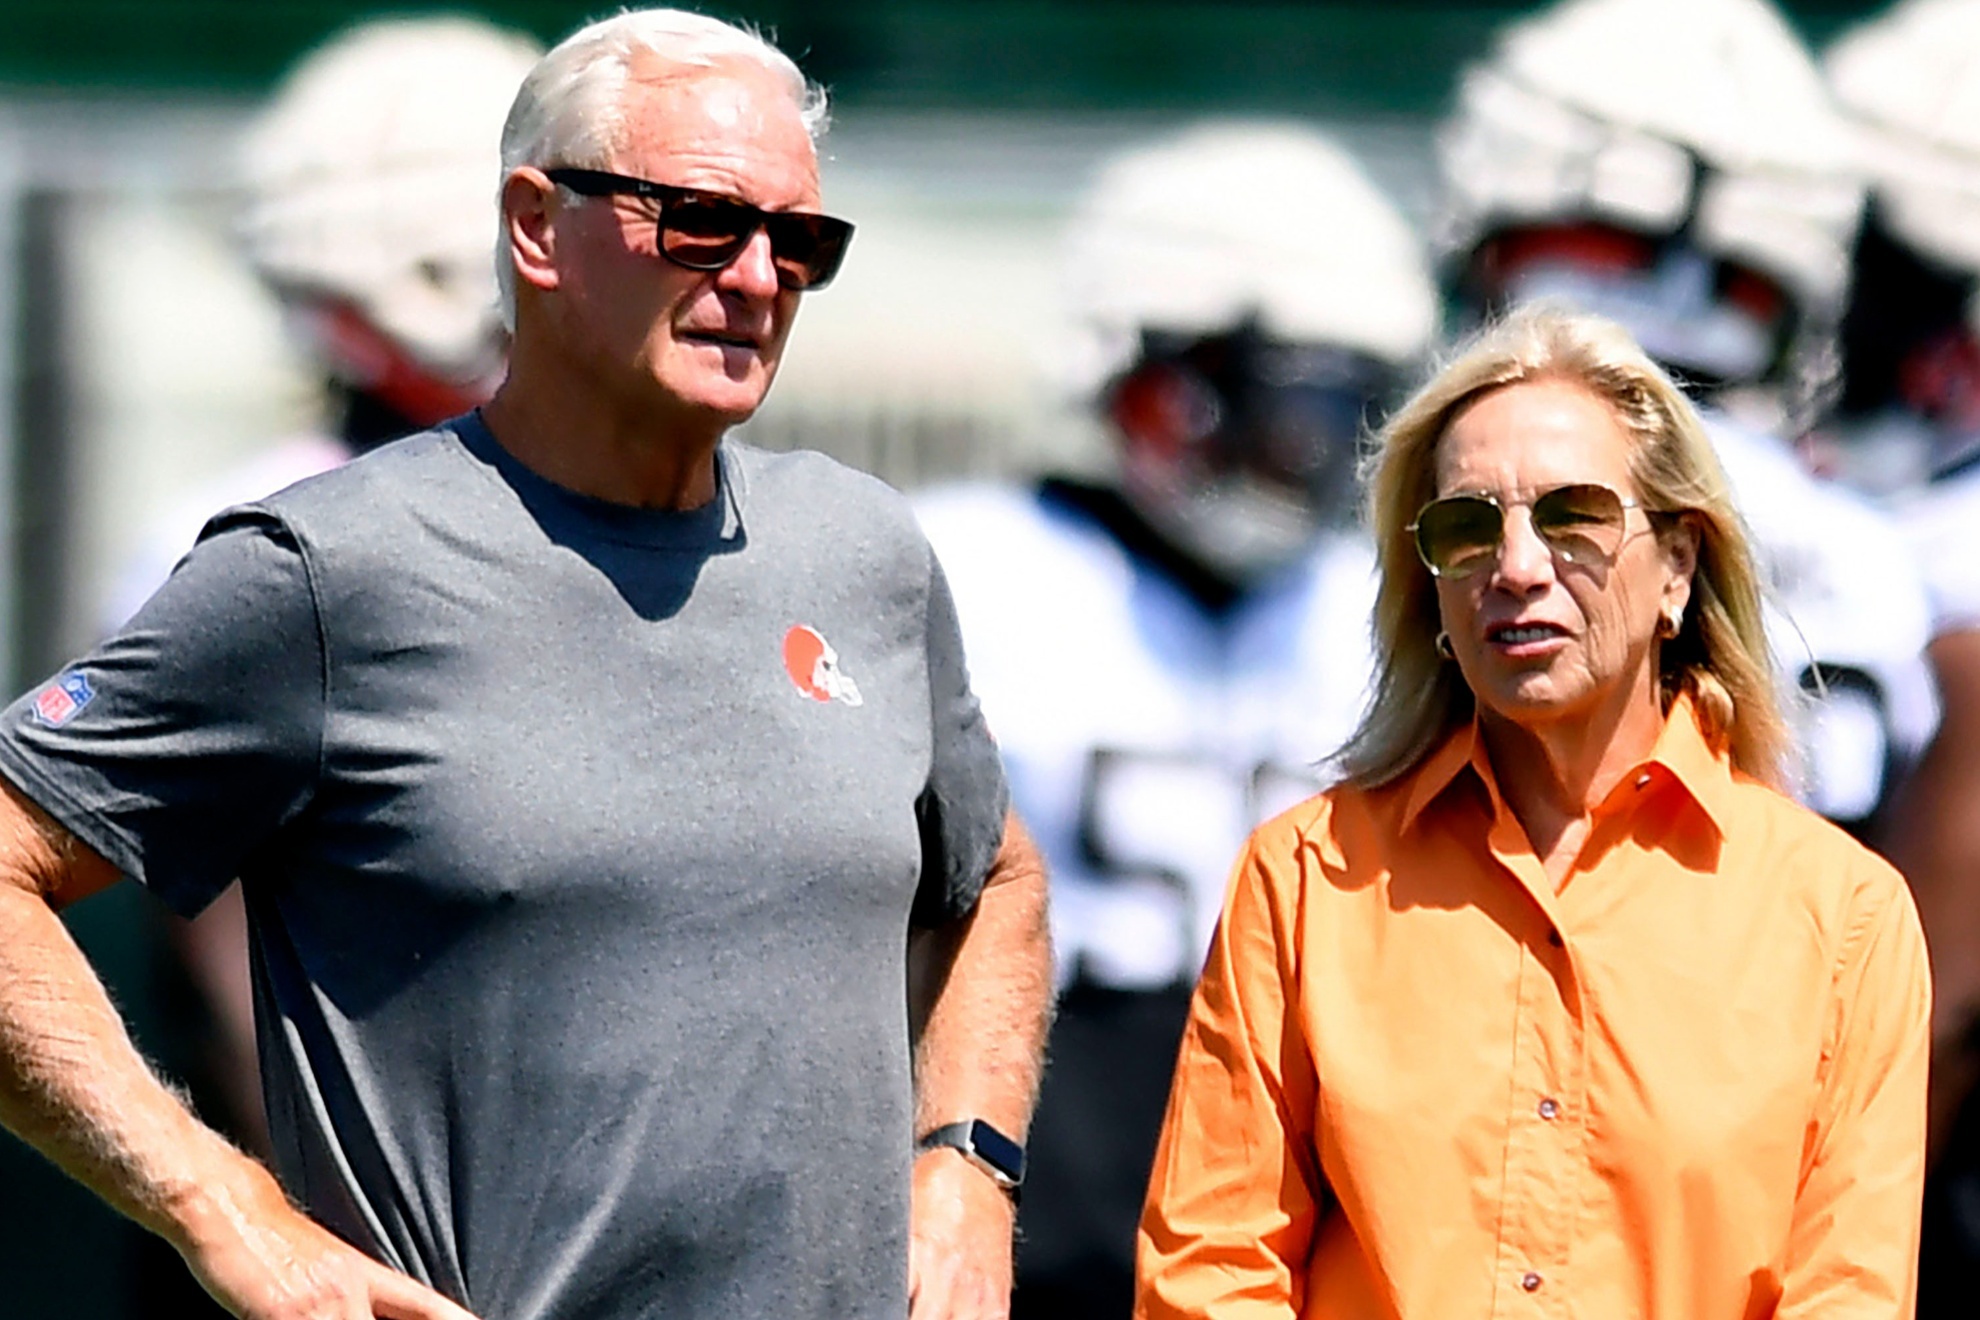 Cleveland Browns co-owners, Jimmy and Dee Haslam.